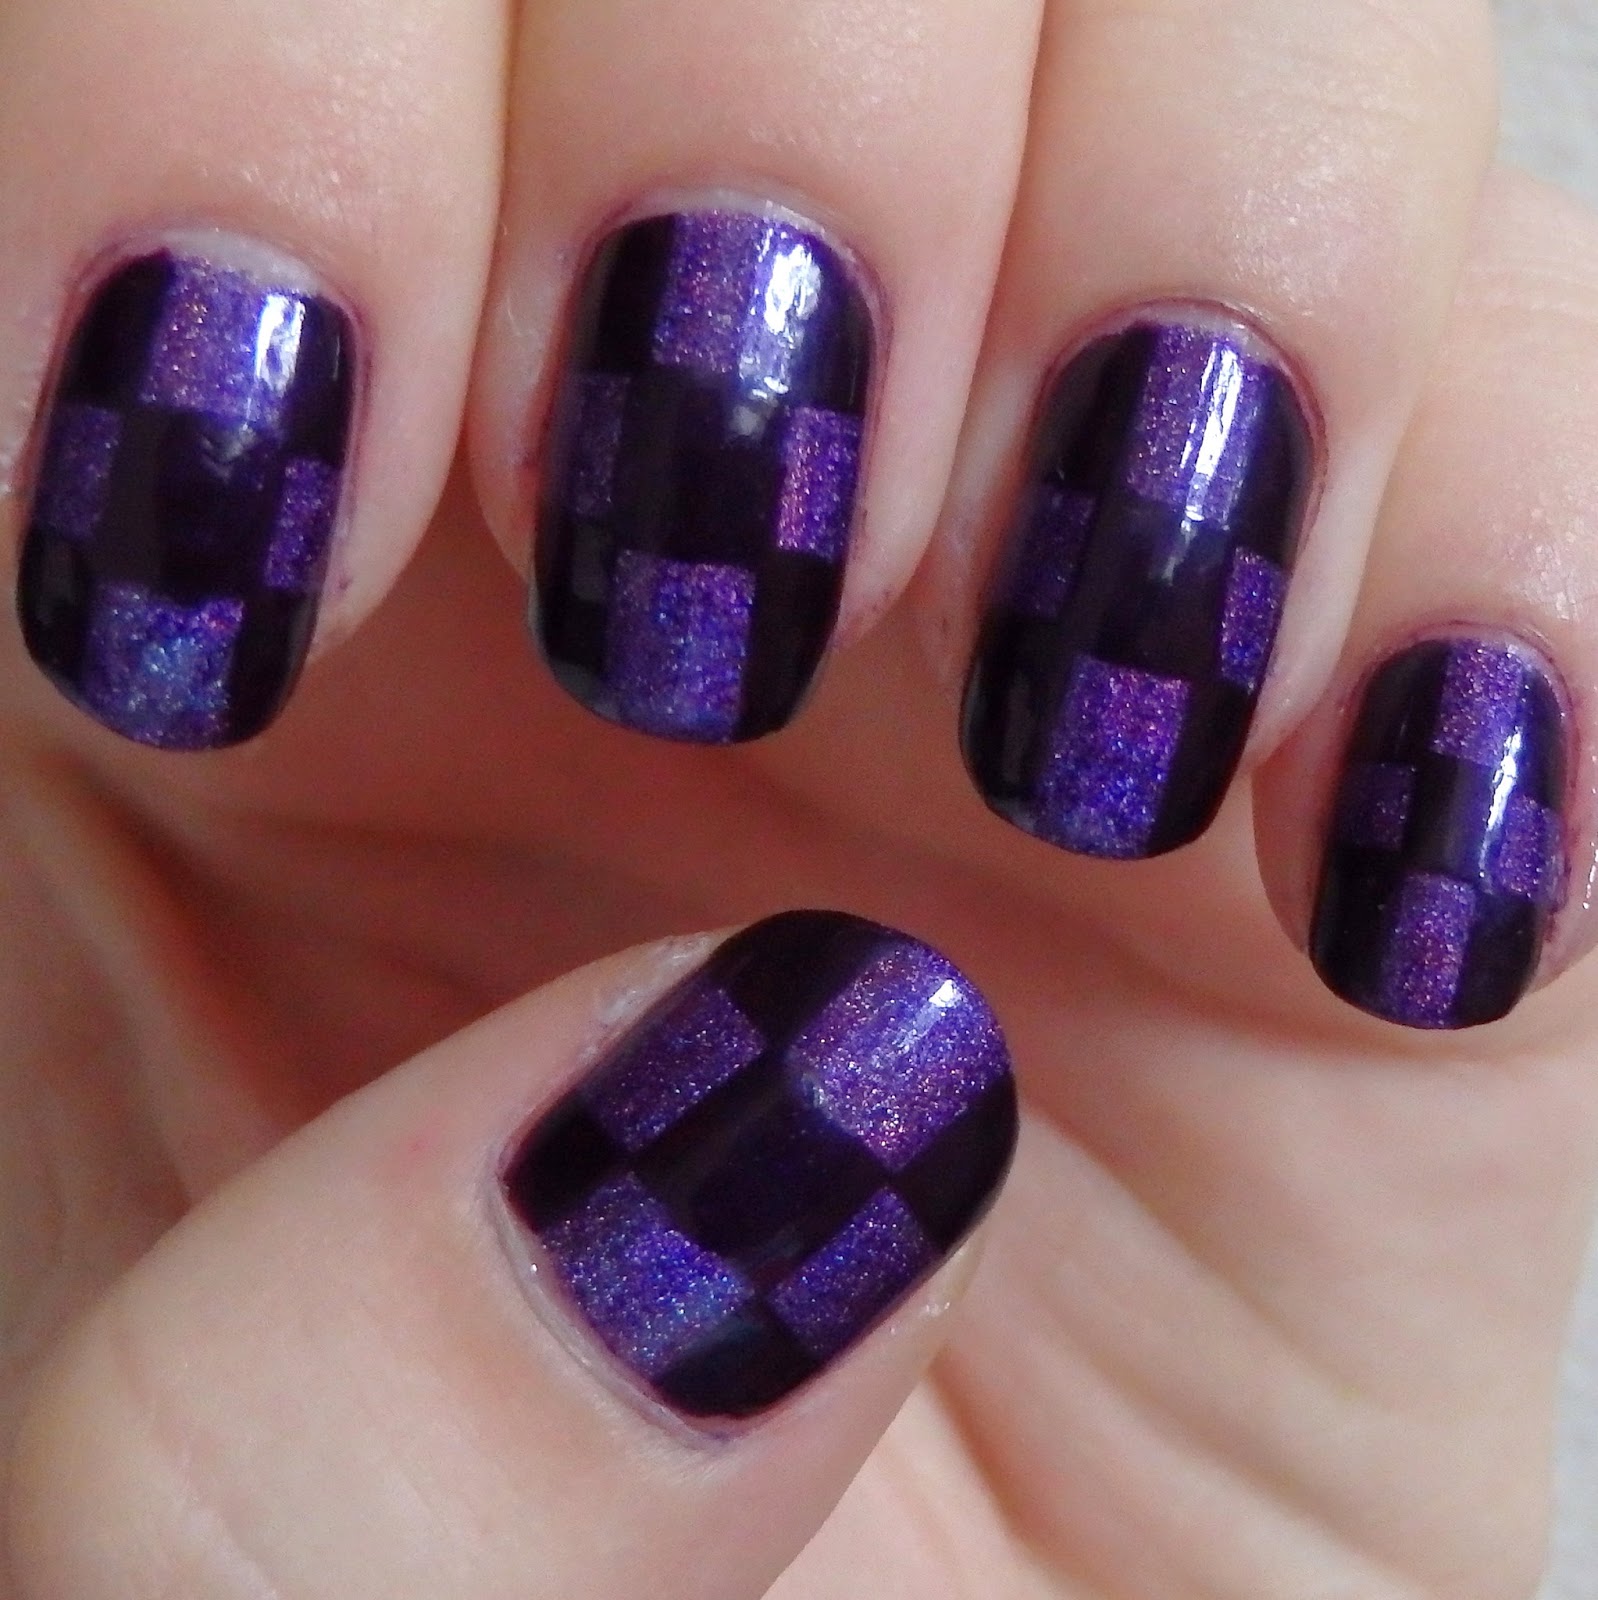 Quixii's Nails: 05/18/13 - Purple Checkers